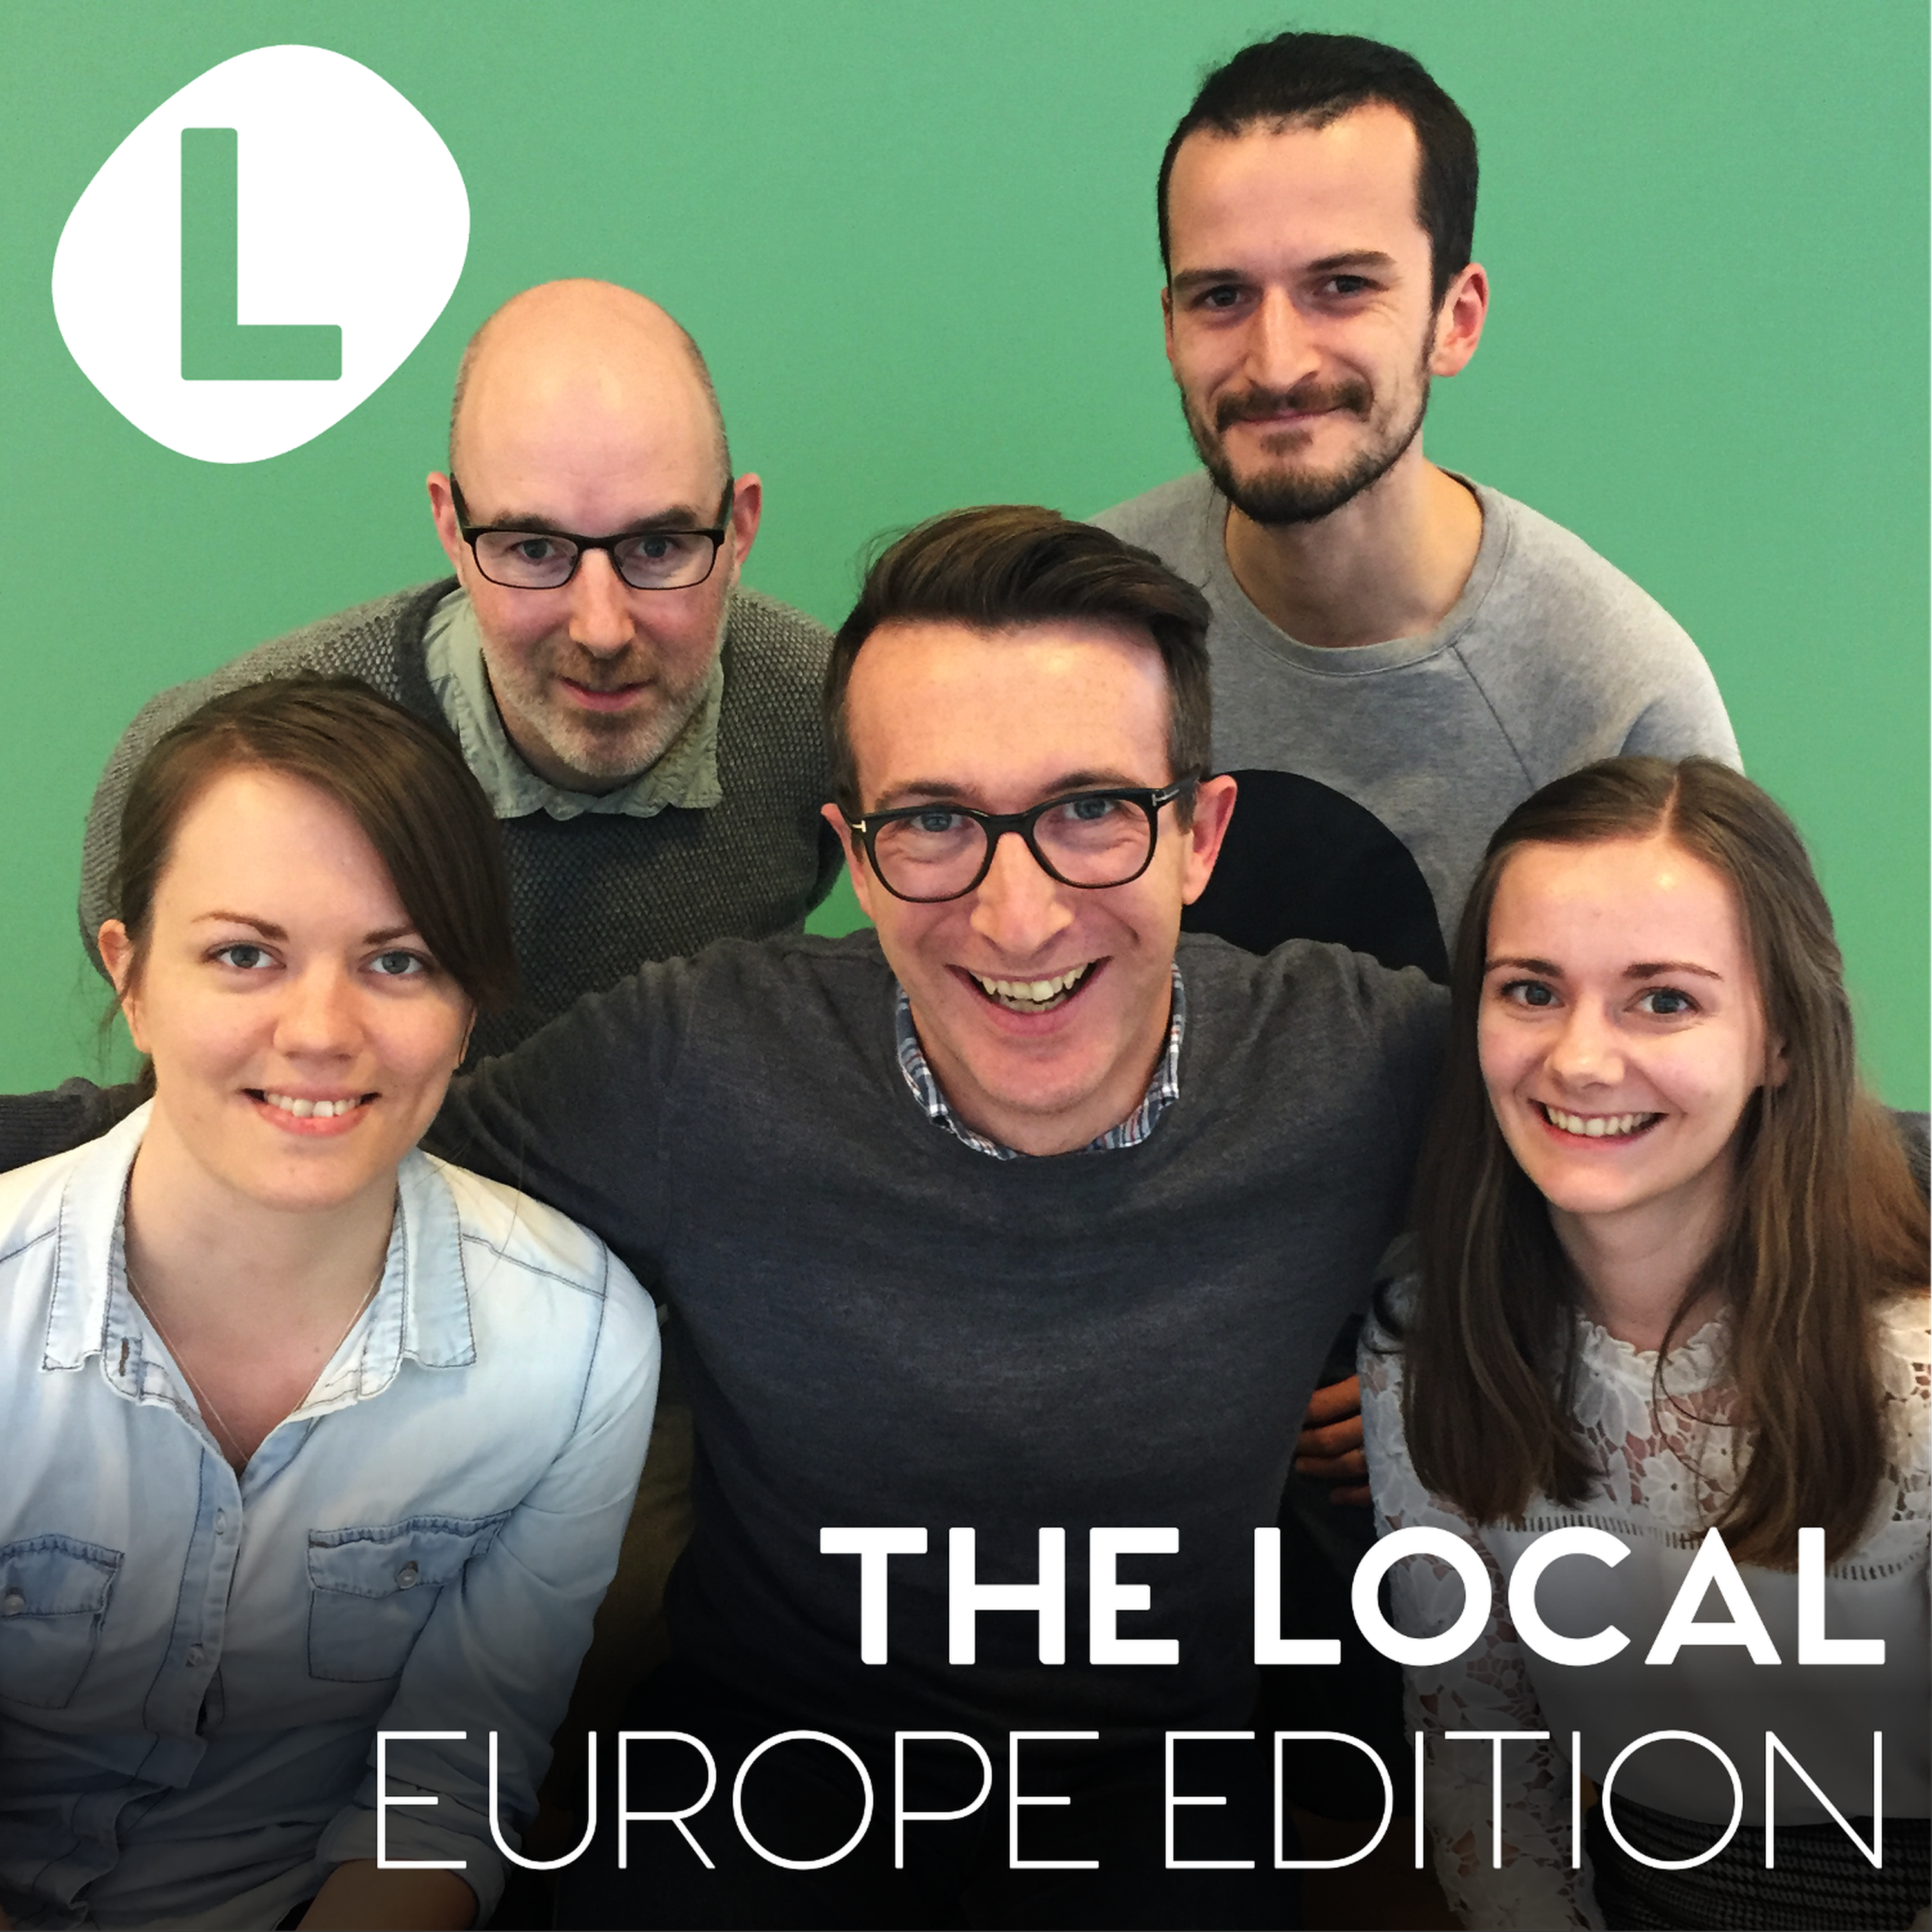 The Local Europe Edition